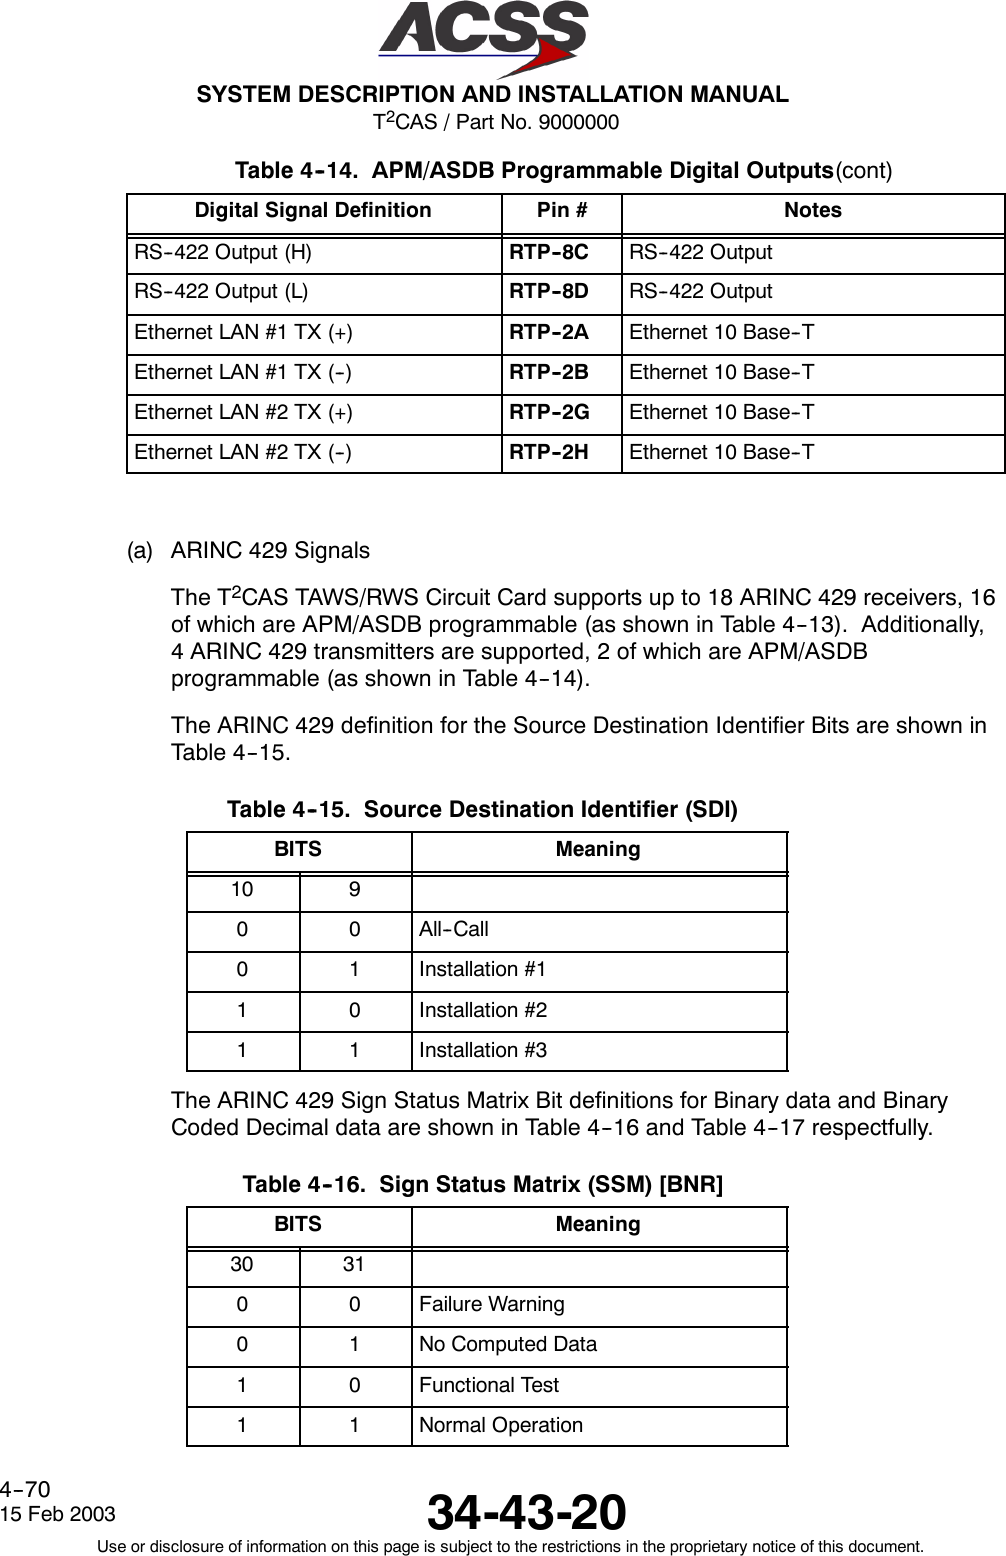 T2CAS / Part No. 9000000SYSTEM DESCRIPTION AND INSTALLATION MANUAL34-43-2015 Feb 2003Use or disclosure of information on this page is subject to the restrictions in the proprietary notice of this document.4--70Table 4--14. APM/ASDB Programmable Digital Outputs(cont)Digital Signal Definition NotesPin #RS--422 Output (H) RTP--8C RS--422 OutputRS--422 Output (L) RTP--8D RS--422 OutputEthernet LAN #1 TX (+) RTP--2A Ethernet 10 Base--TEthernet LAN #1 TX (--) RTP--2B Ethernet 10 Base--TEthernet LAN #2 TX (+) RTP--2G Ethernet 10 Base--TEthernet LAN #2 TX (--) RTP--2H Ethernet 10 Base--T(a) ARINC 429 SignalsThe T2CAS TAWS/RWS Circuit Card supports up to 18 ARINC 429 receivers, 16of which are APM/ASDB programmable (as shown in Table 4--13). Additionally,4 ARINC 429 transmitters are supported, 2 of which are APM/ASDBprogrammable (as shown in Table 4--14).The ARINC 429 definition for the Source Destination Identifier Bits are shown inTable 4--15.Table 4--15. Source Destination Identifier (SDI)BITS Meaning10 90 0 All--Call0 1 Installation #11 0 Installation #21 1 Installation #3The ARINC 429 Sign Status Matrix Bit definitions for Binary data and BinaryCoded Decimal data are shown in Table 4--16 and Table 4--17 respectfully.Table 4--16. Sign Status Matrix (SSM) [BNR]BITS Meaning30 310 0 Failure Warning0 1 No Computed Data1 0 Functional Test1 1 Normal Operation